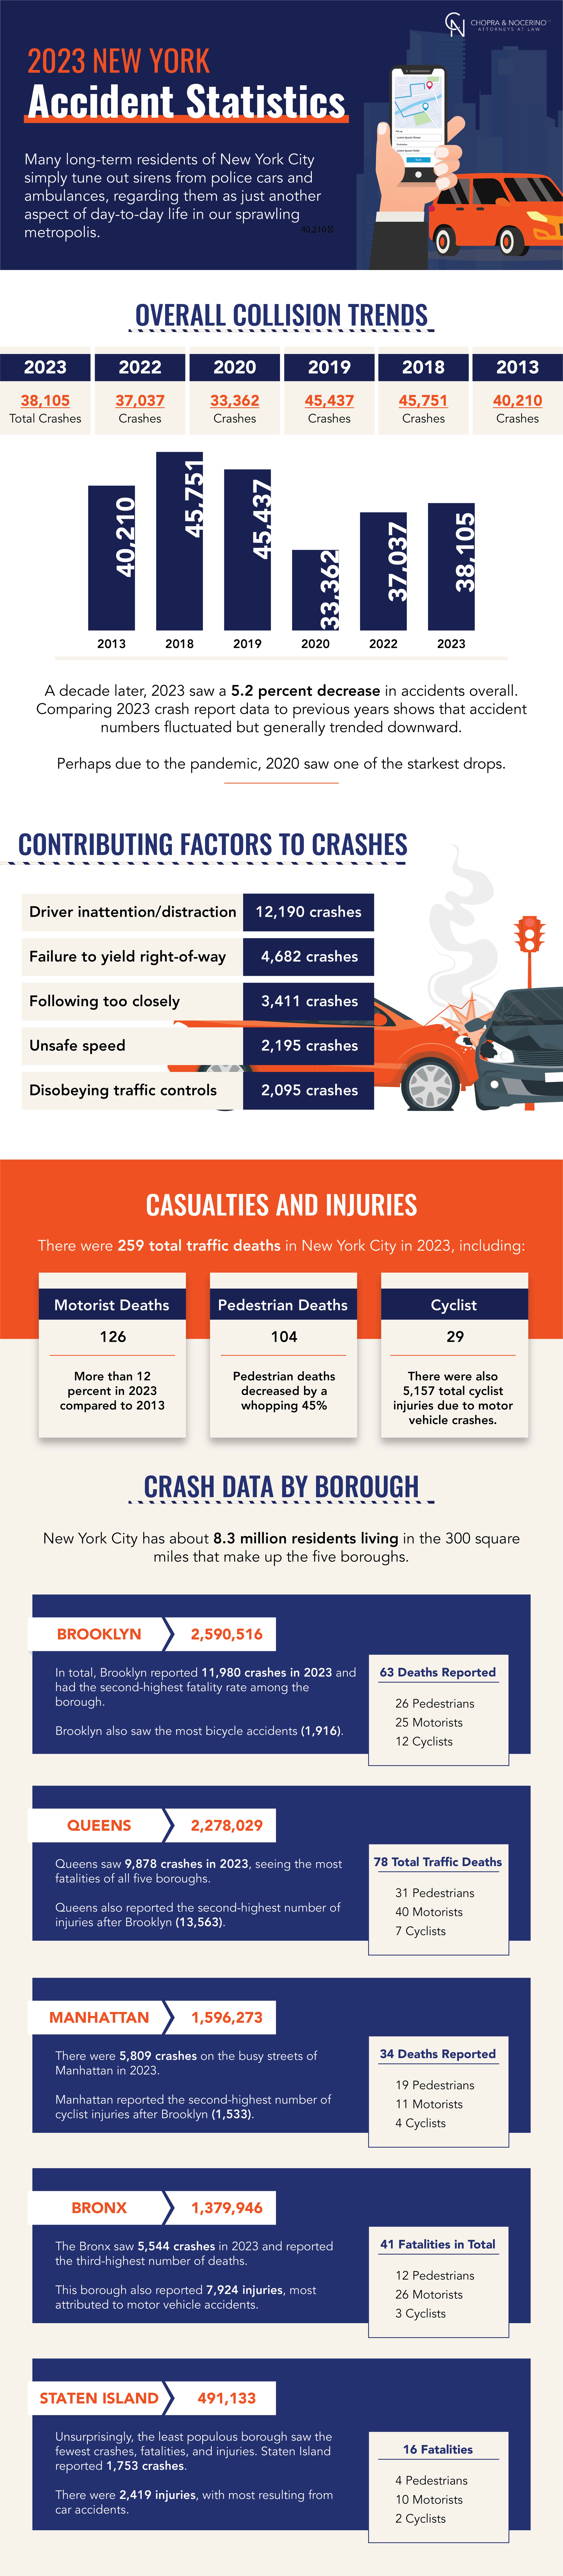 2023 New York Accident Statistics overviewing crash data by borough, casualties and injuries, factors contributing to crashes, and overall collision trends